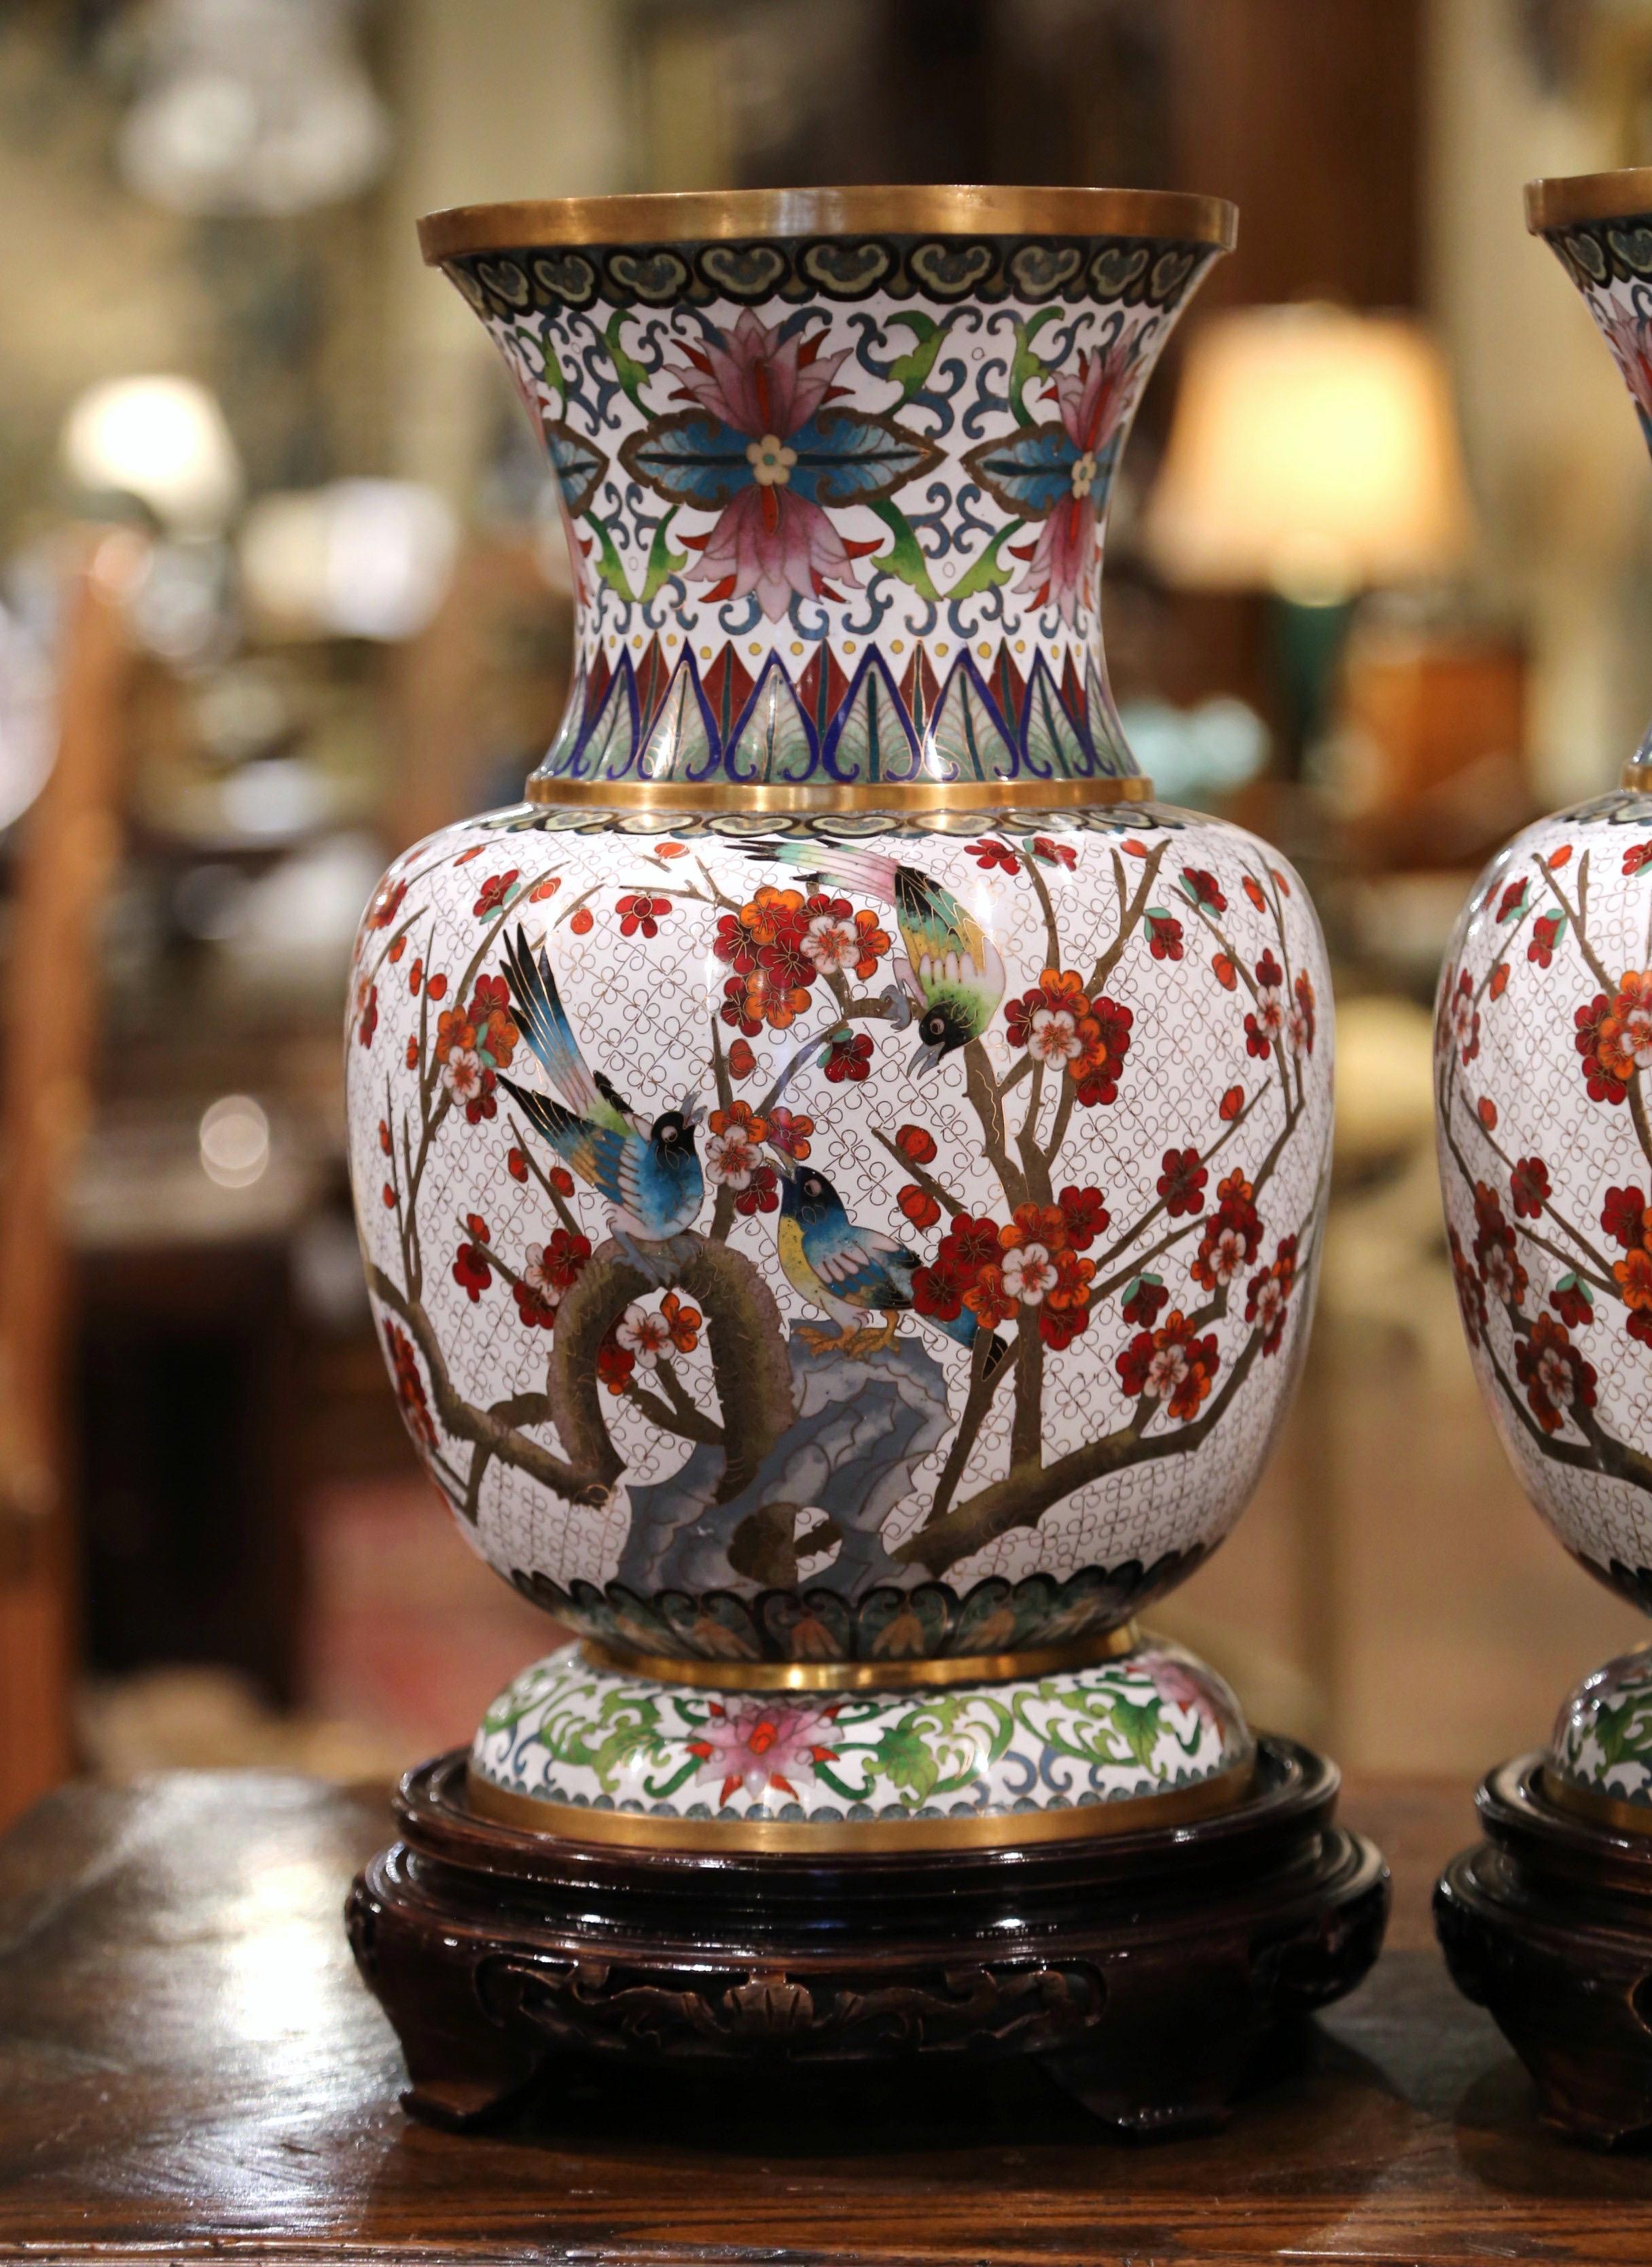 Cloissoné Pair of 20th Century Chinese Cloisonné Enamel Vases on Stand with Bird Decor